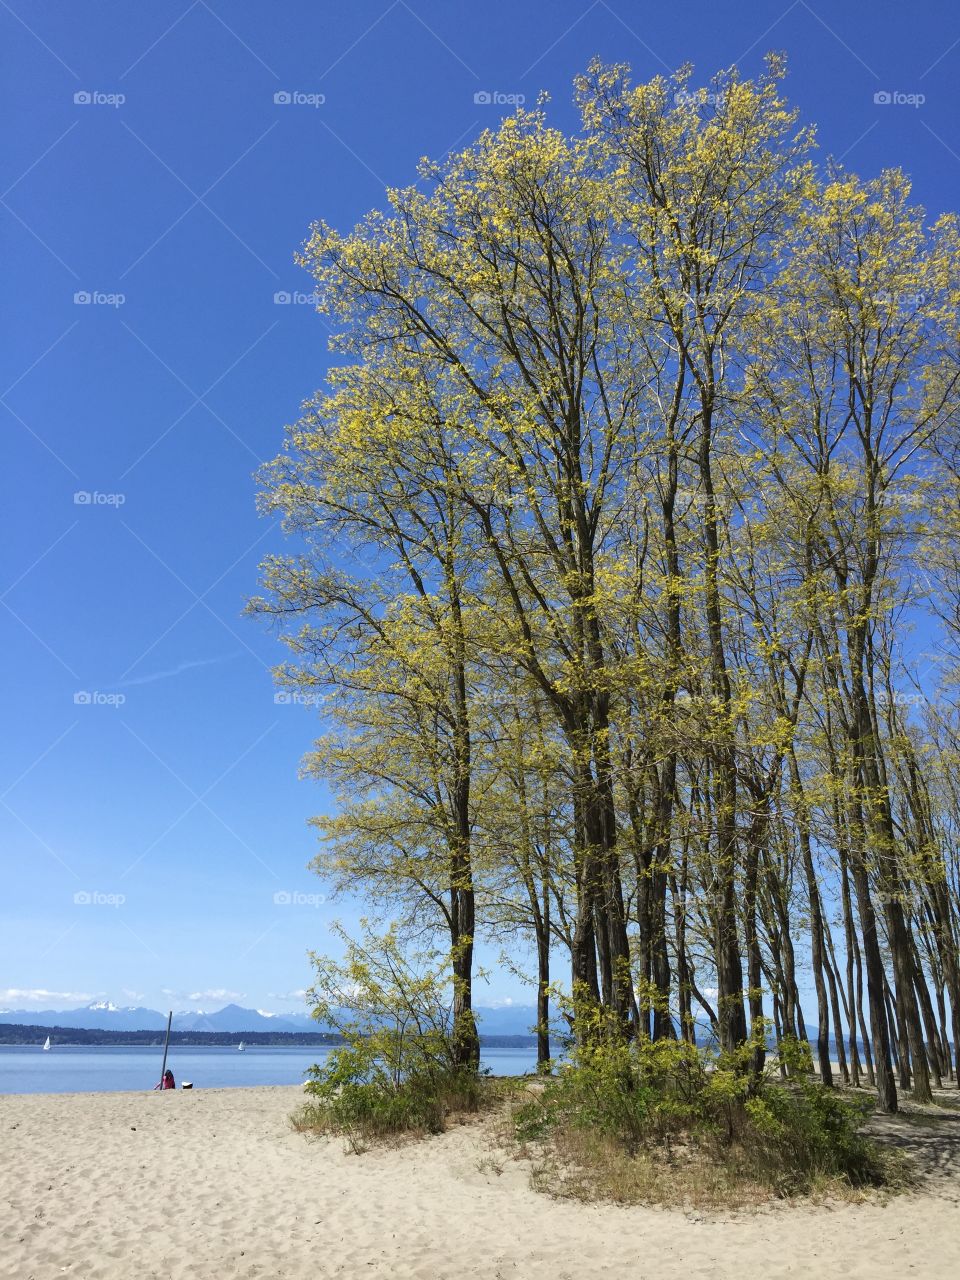 Trees at the Beach. Golden Gardens Park beach and view of Olympic Mountains 